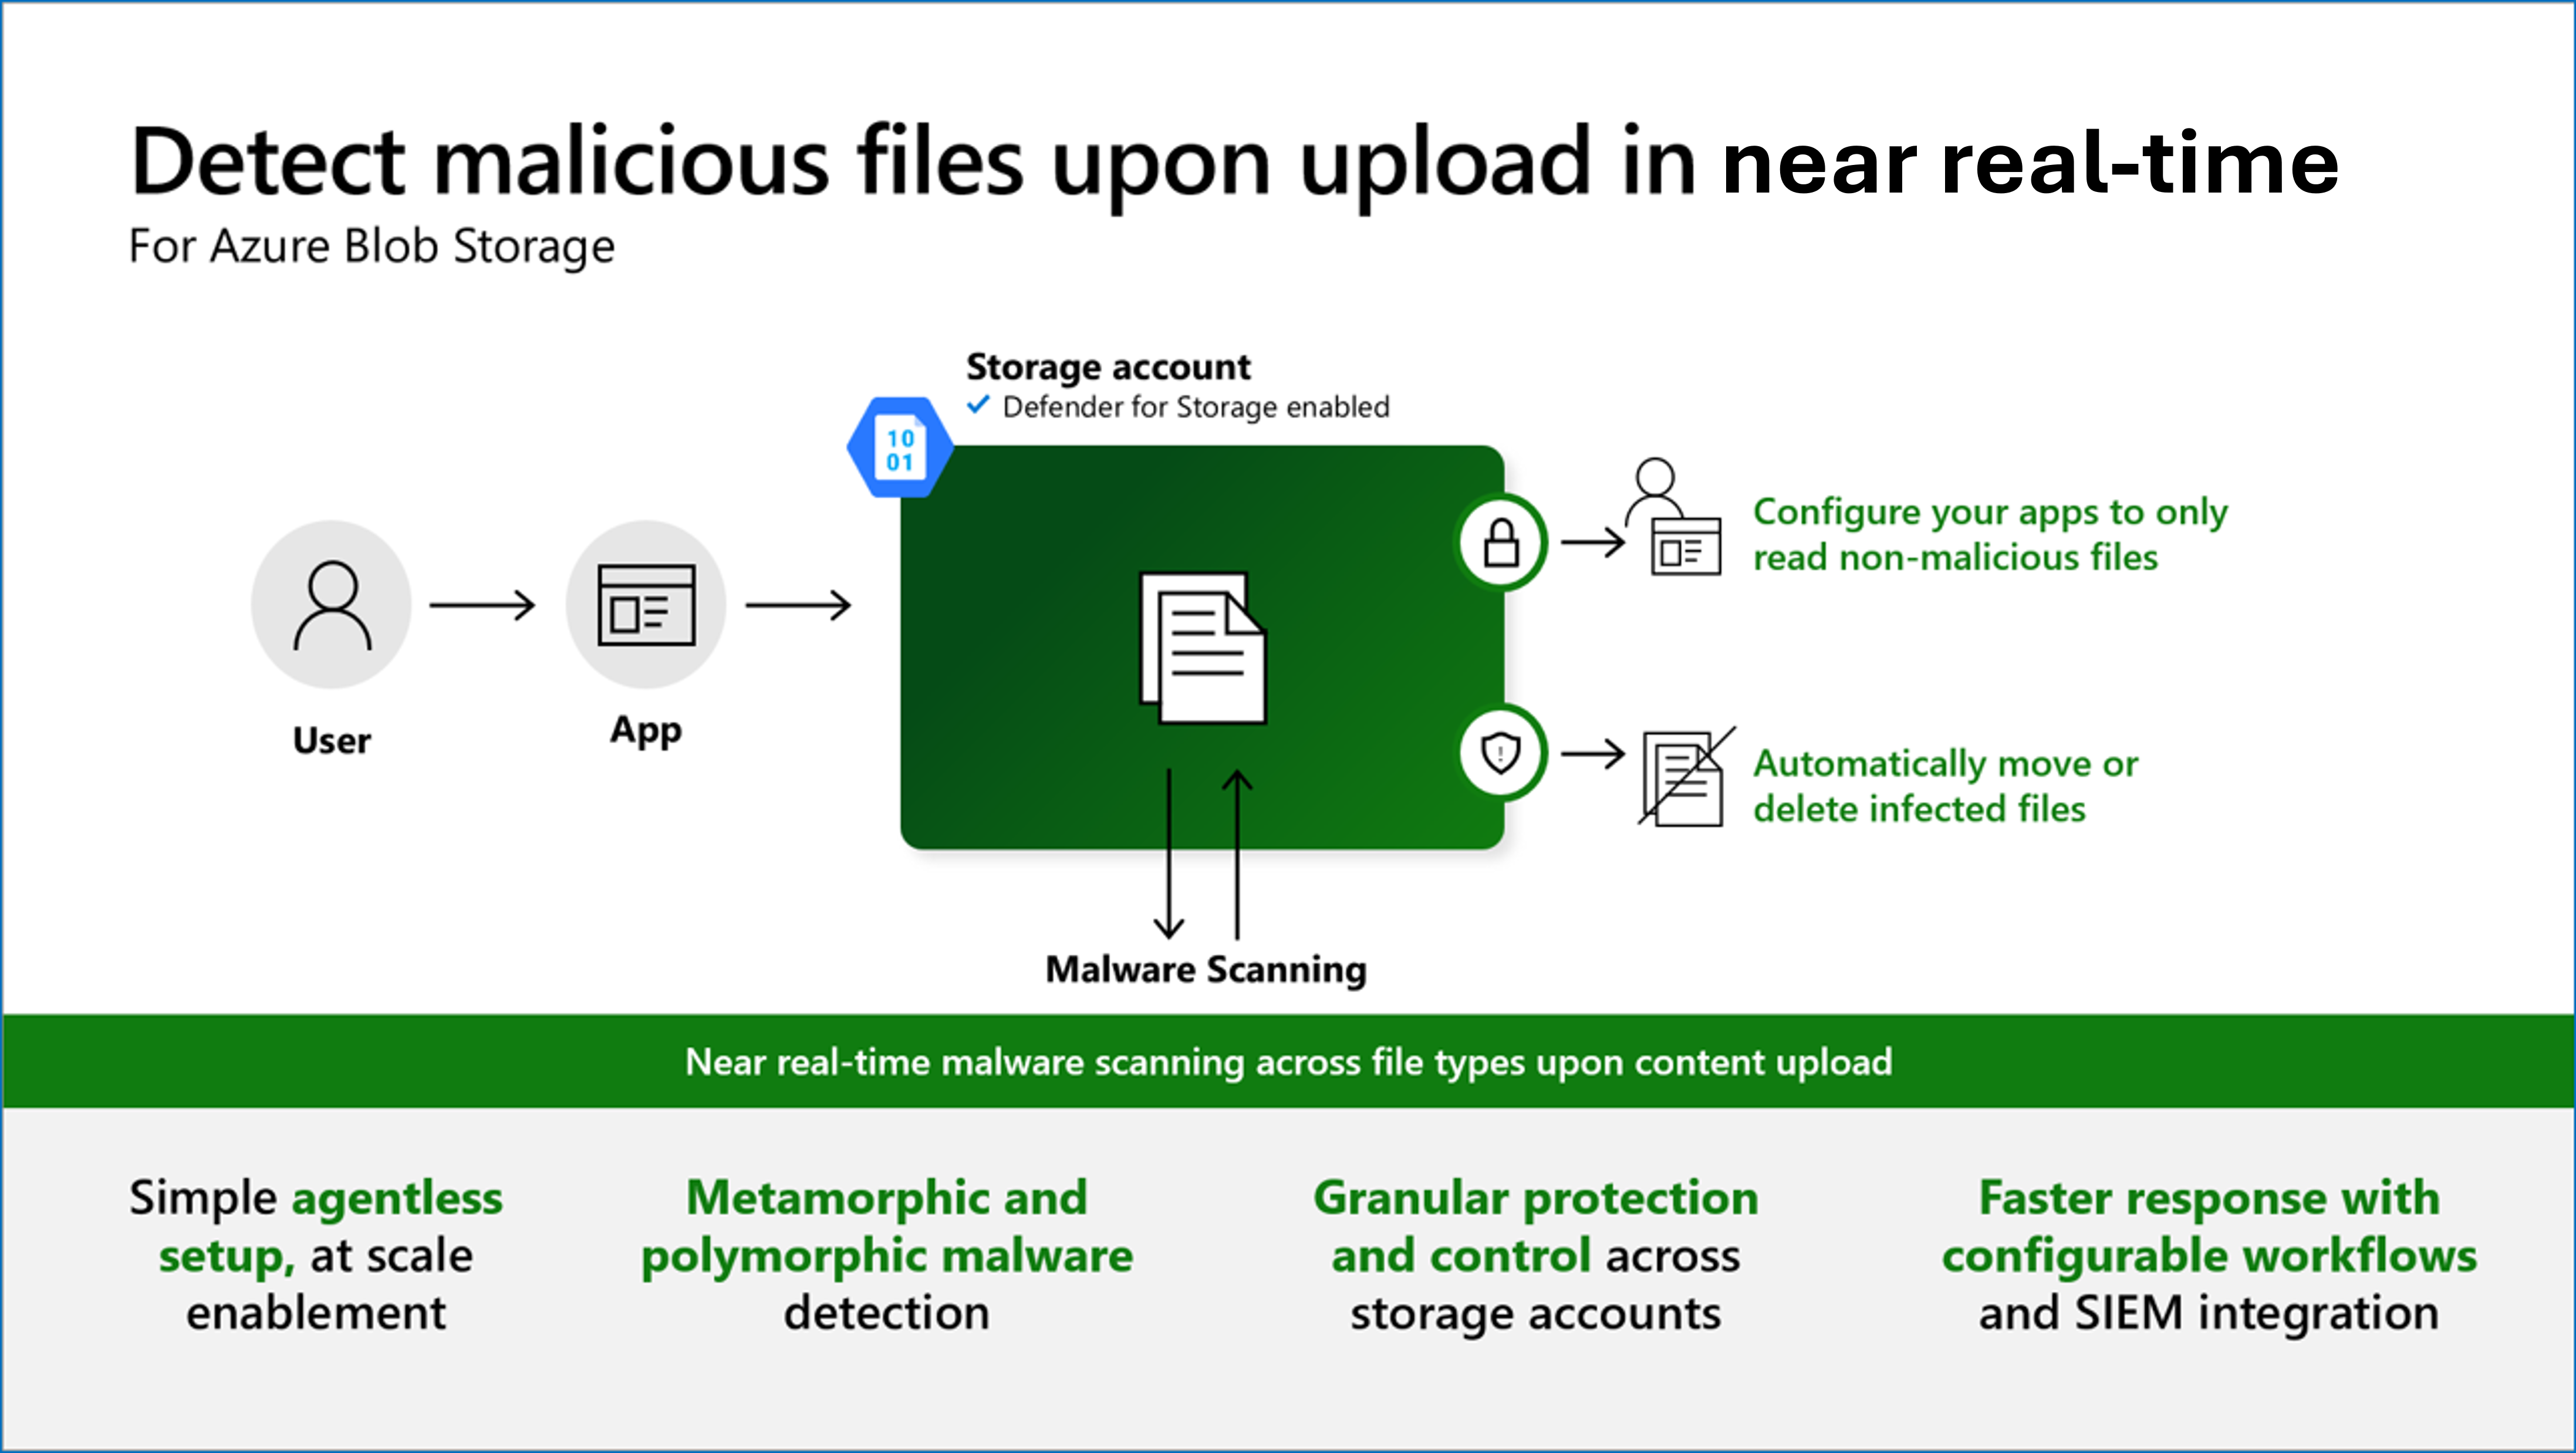 Diagram showing how Malware Scanning detects malicious files upon upload in near real-time.